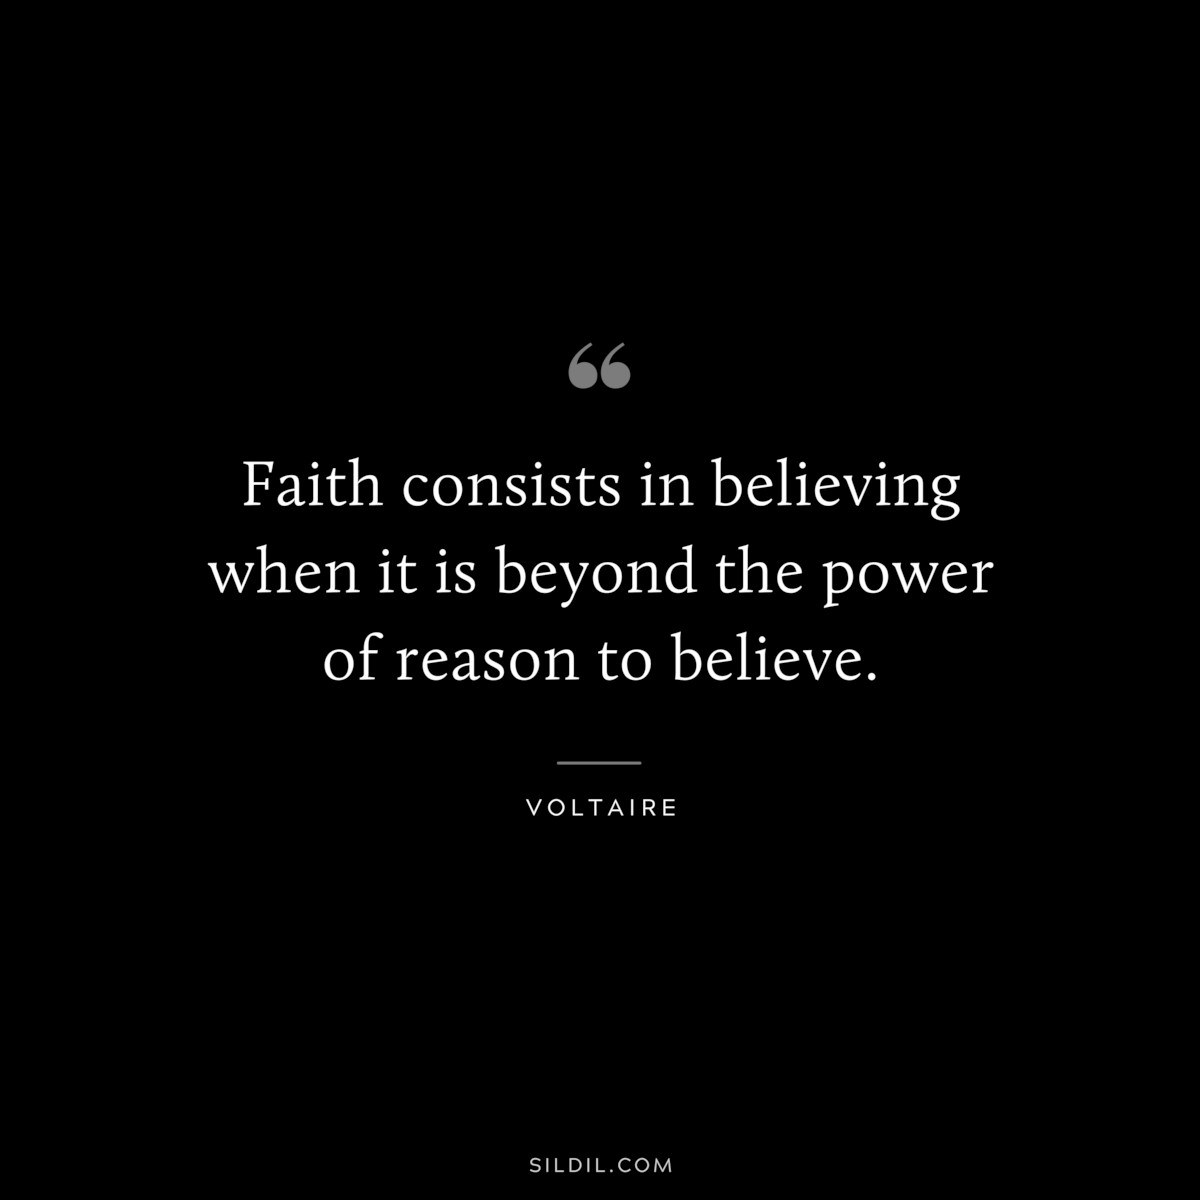 Faith consists in believing when it is beyond the power of reason to believe. ― Voltaire